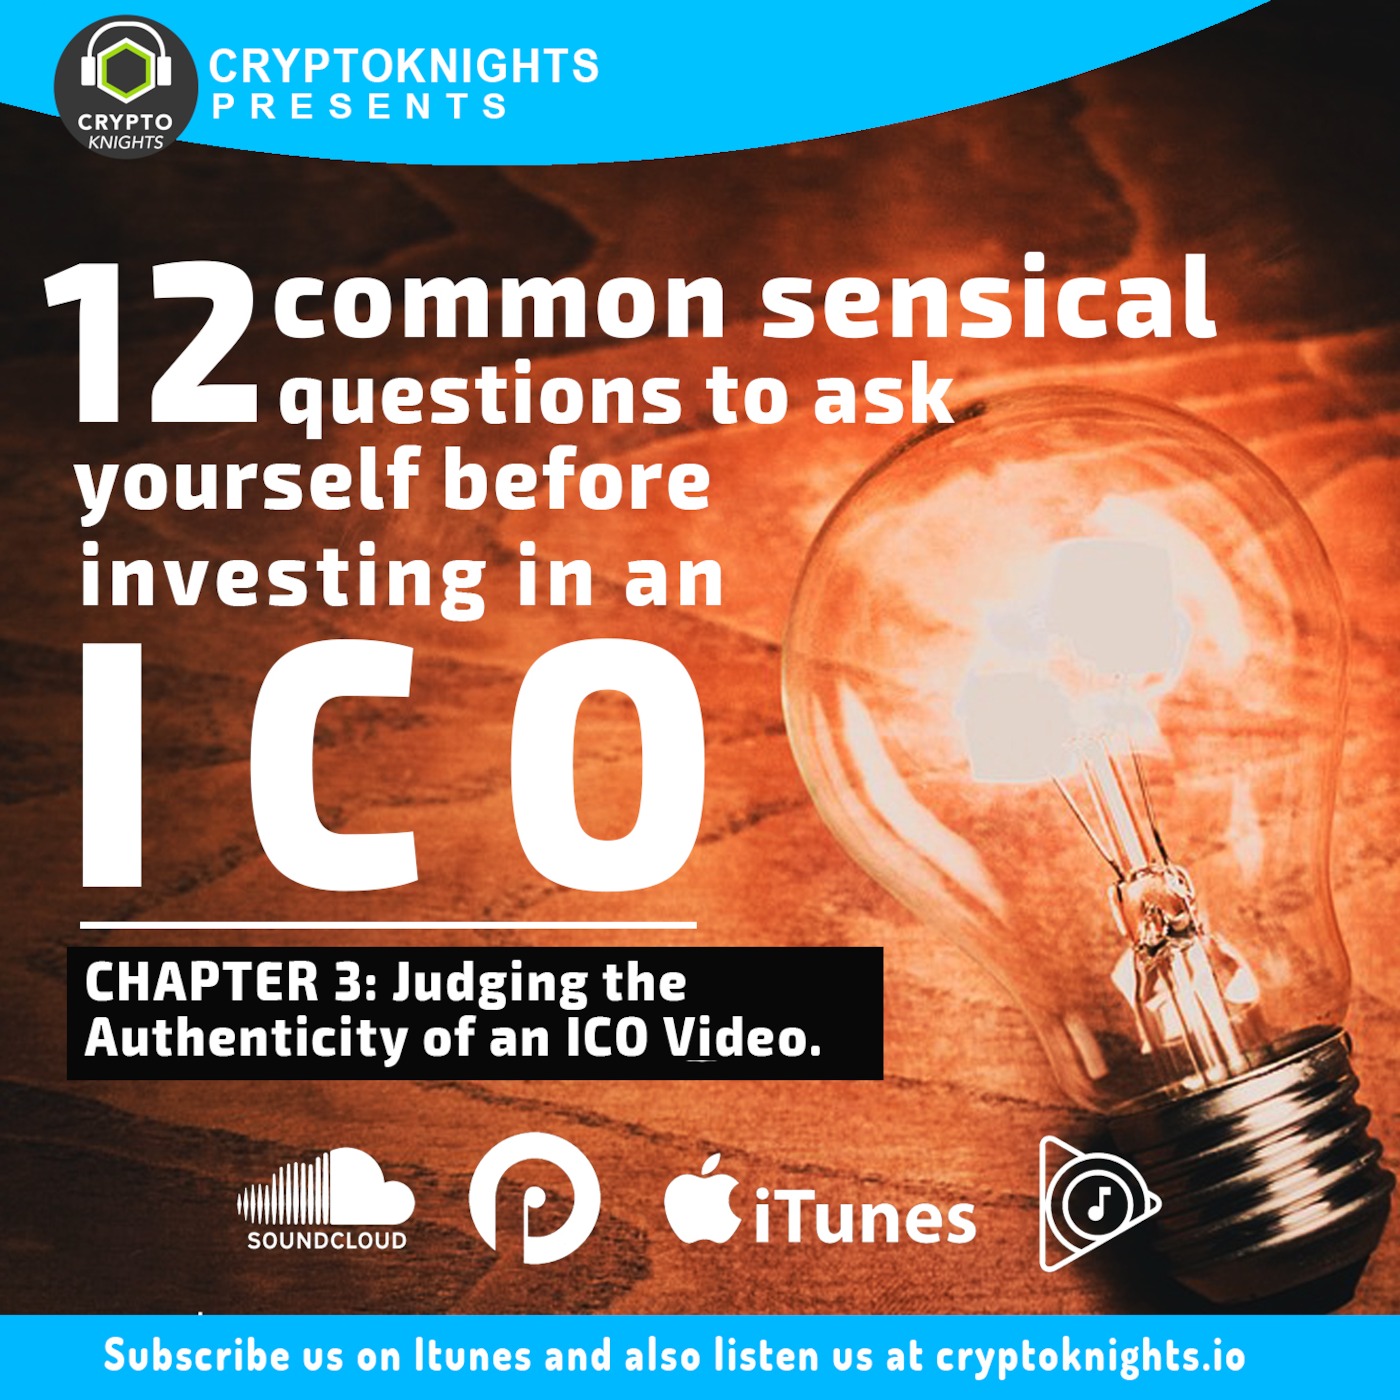 12 Common Sensical Questions to Ask Before Investing in an ICO. CHAPTER 3: Judging the Authenticity of an ICO Video.